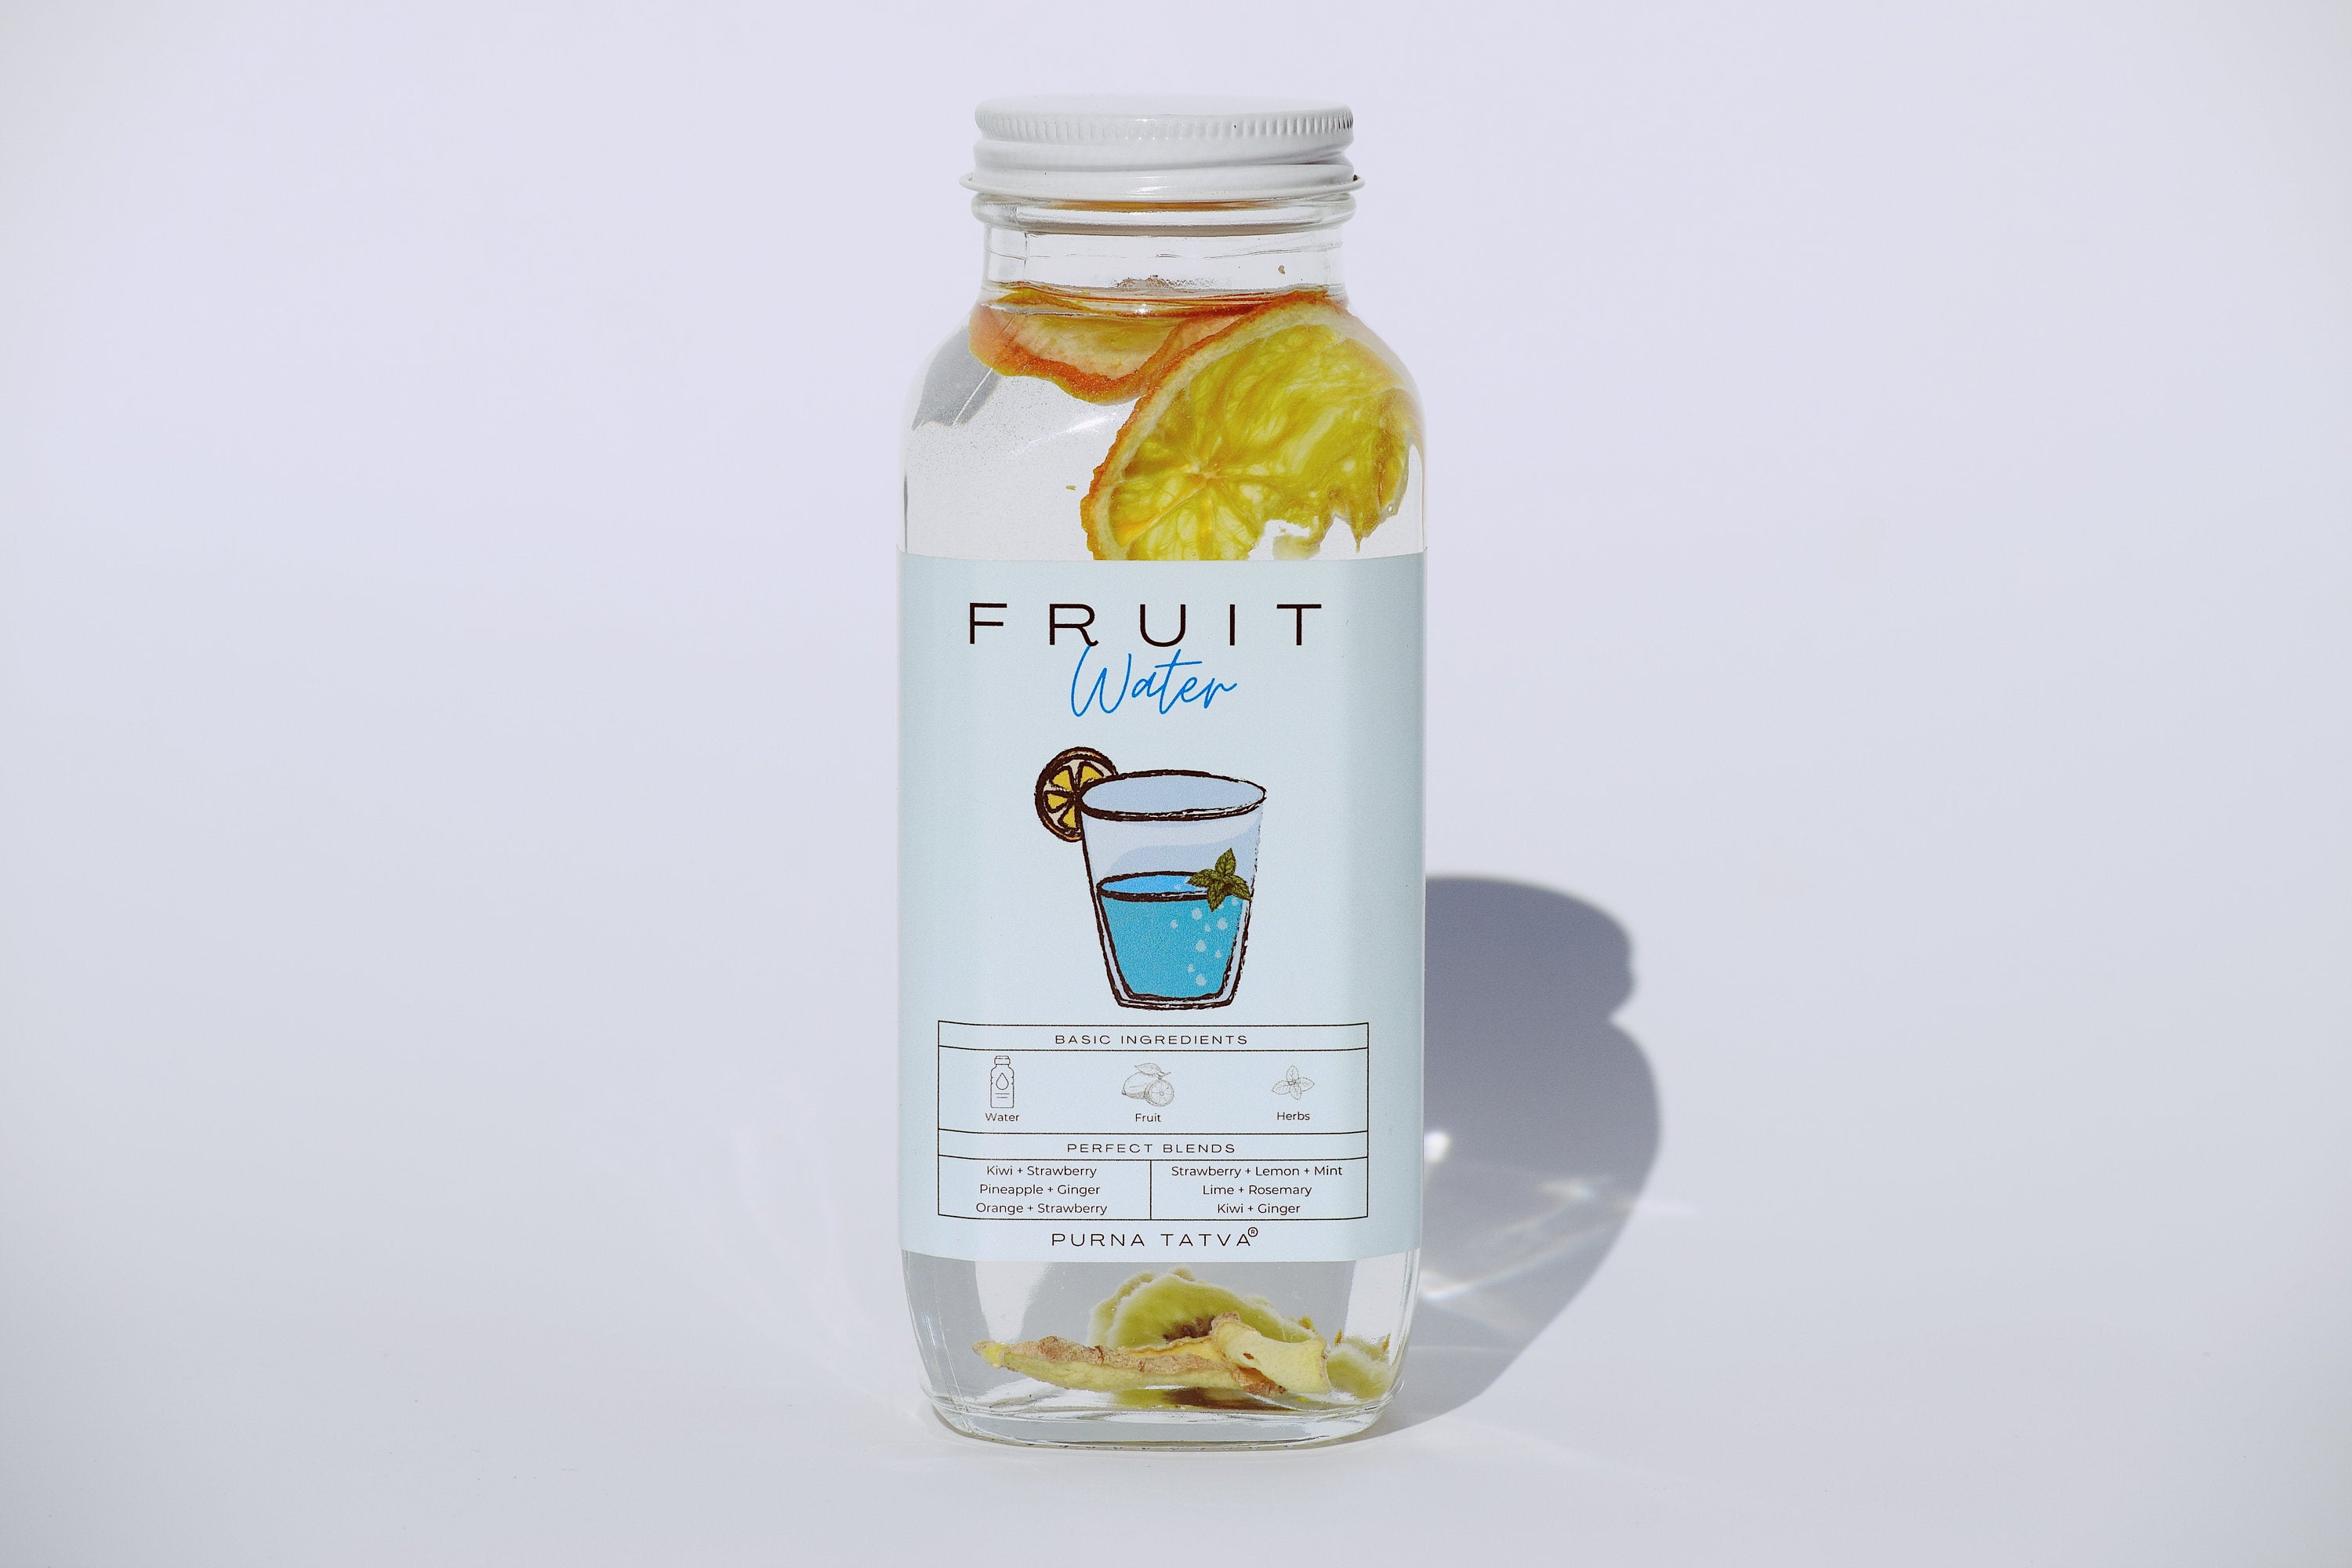 Personalized Water infusion kit